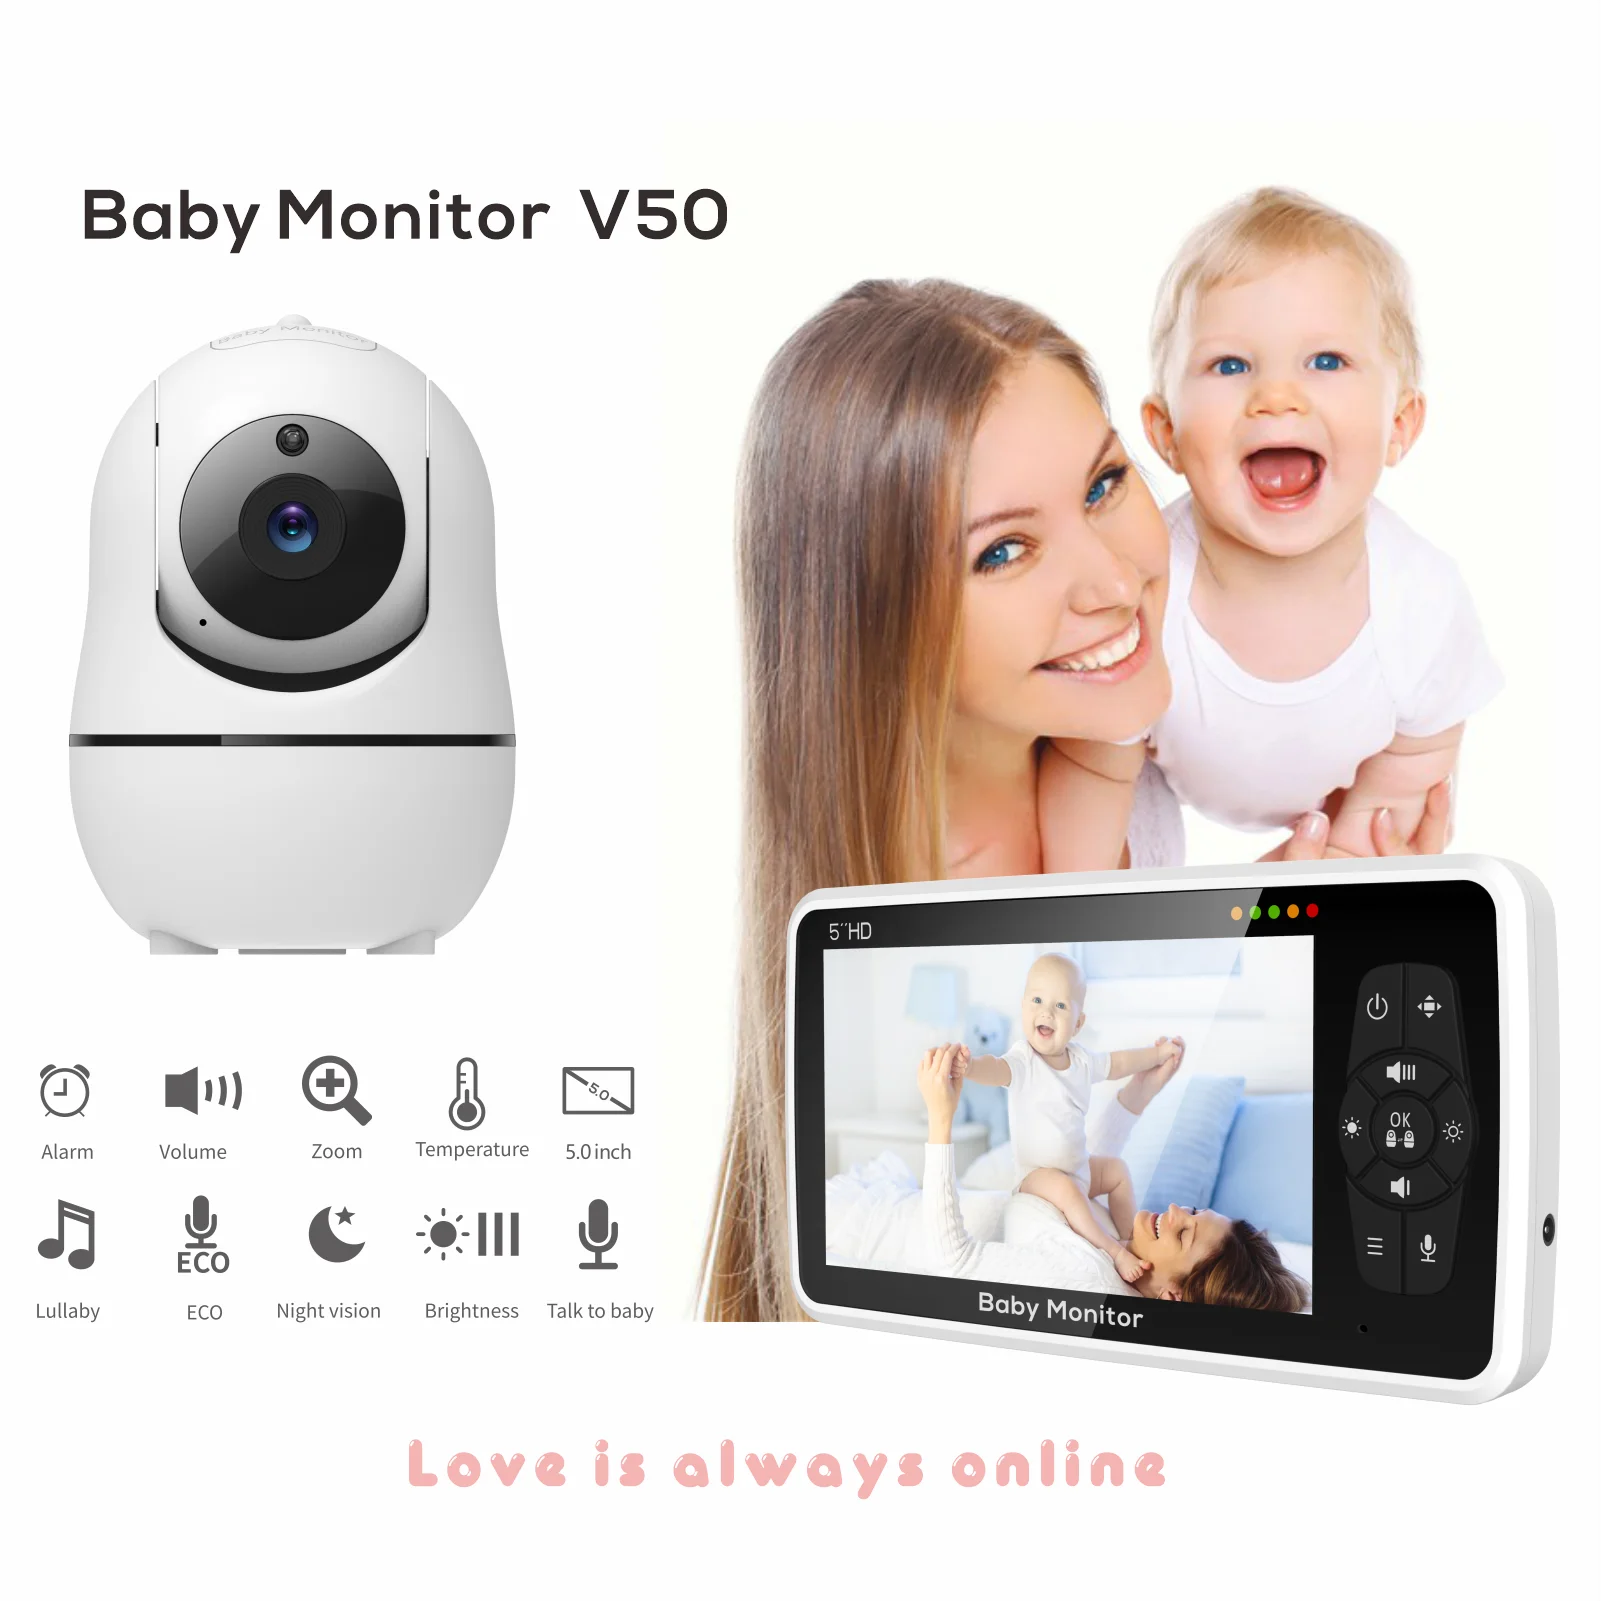 https://ae01.alicdn.com/kf/Hbbec84da3a4844a982afba293ee7205dv/5-0-Inch-Baby-Monitor-with-Camera-Wireless-Video-Nanny-720P-HD-Security-Night-Vision-Temperature.png